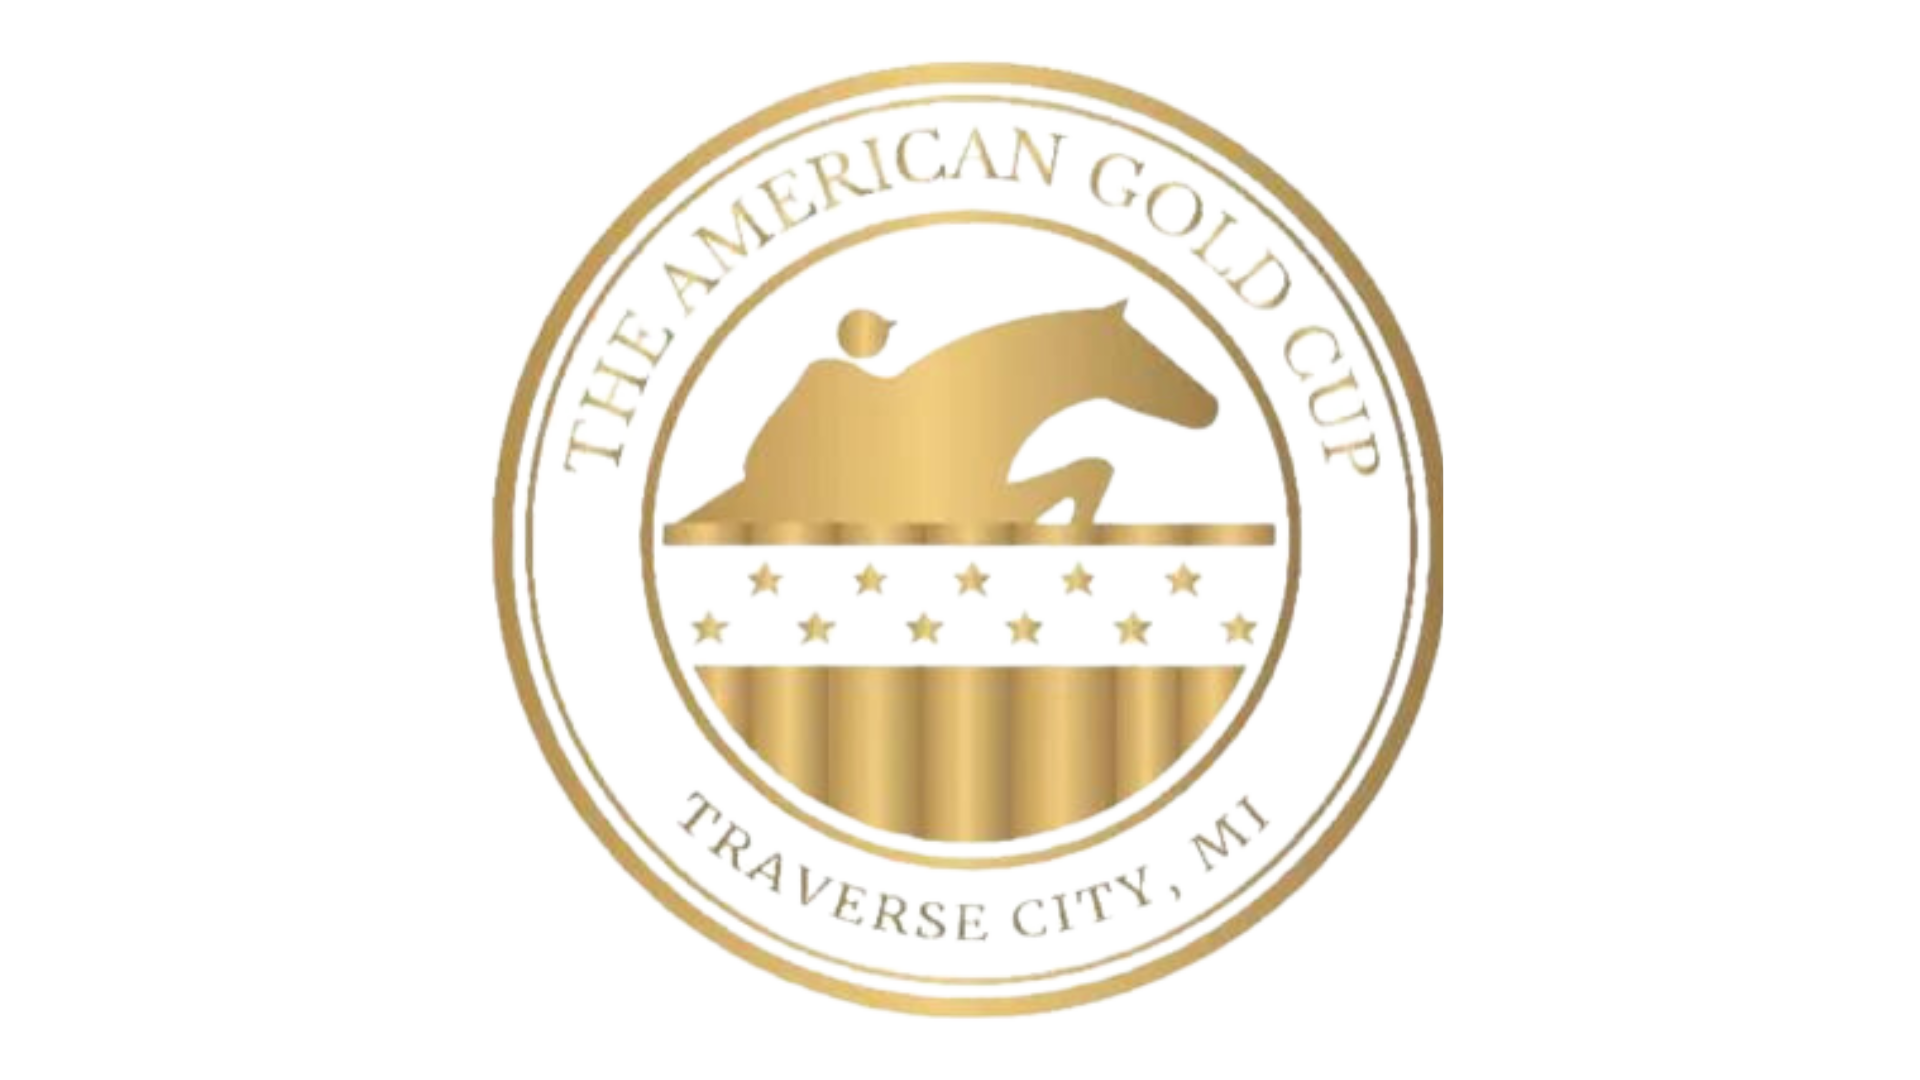 EA Limited Inc. proudly sold at the American Gold Cup in Traverse City, MI.